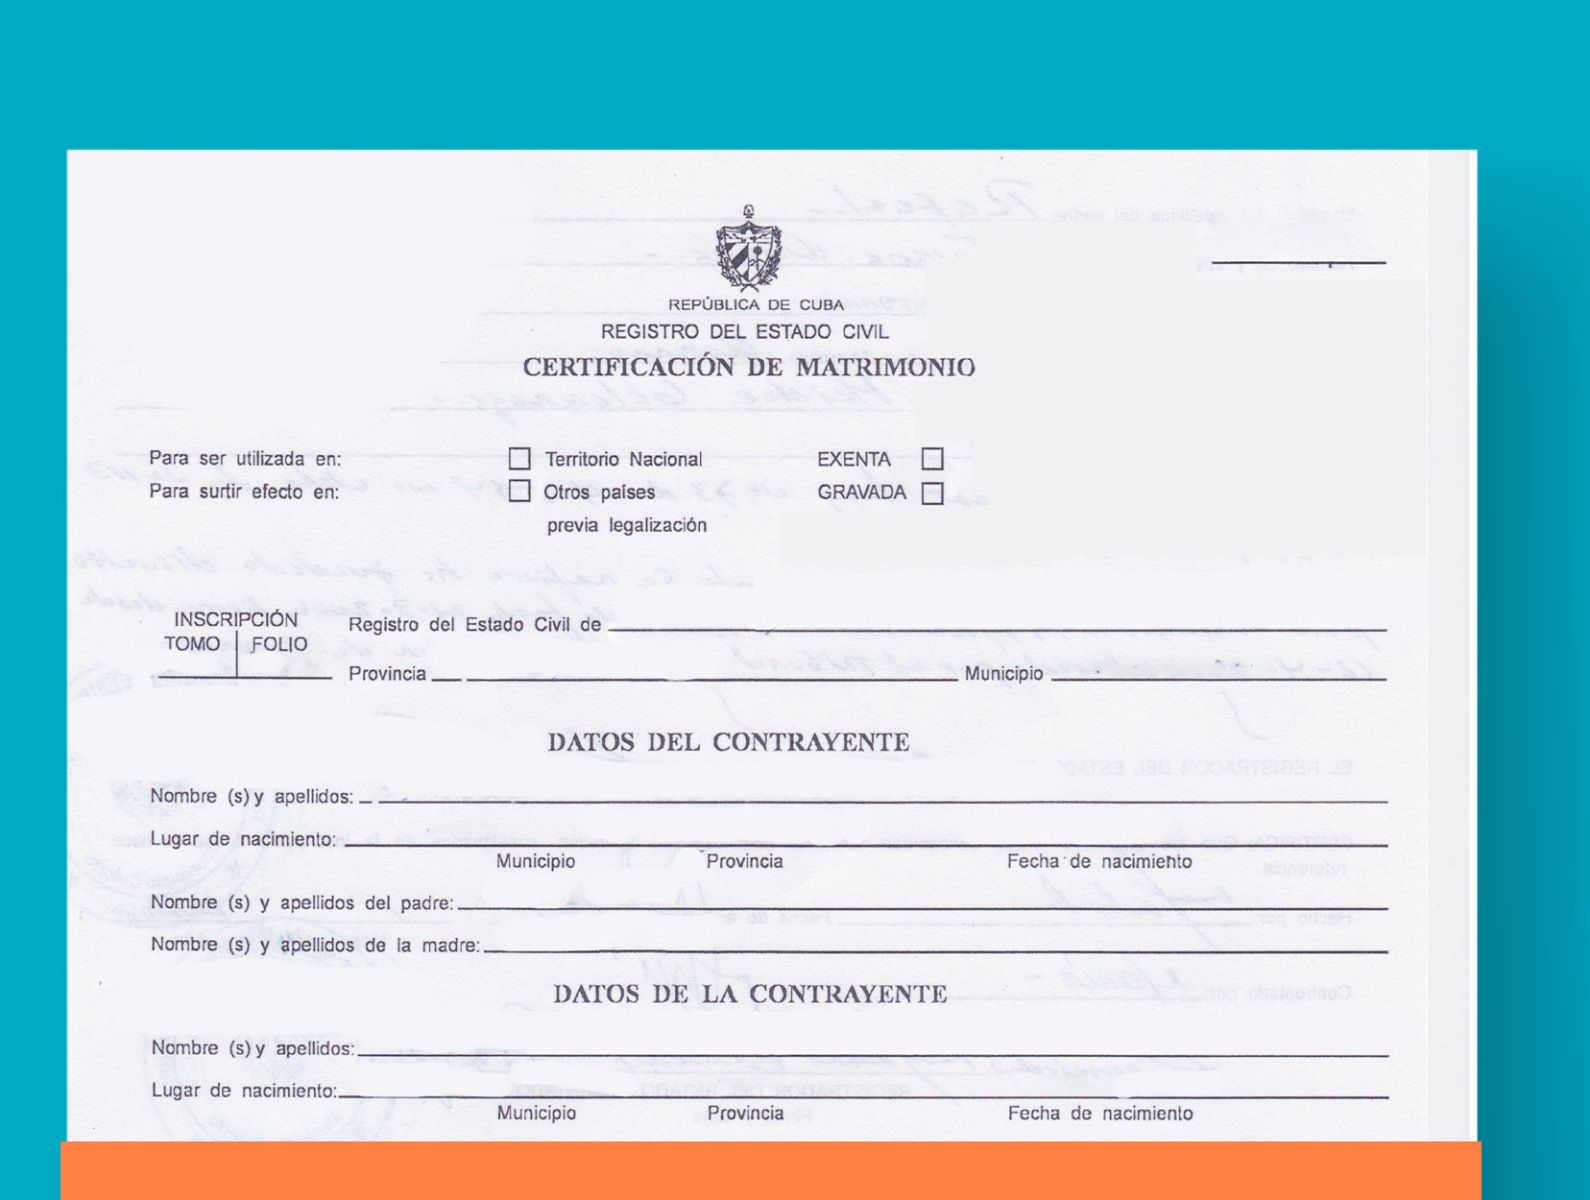 Marriage Certificate Template Cuba by Universal Translation Services on